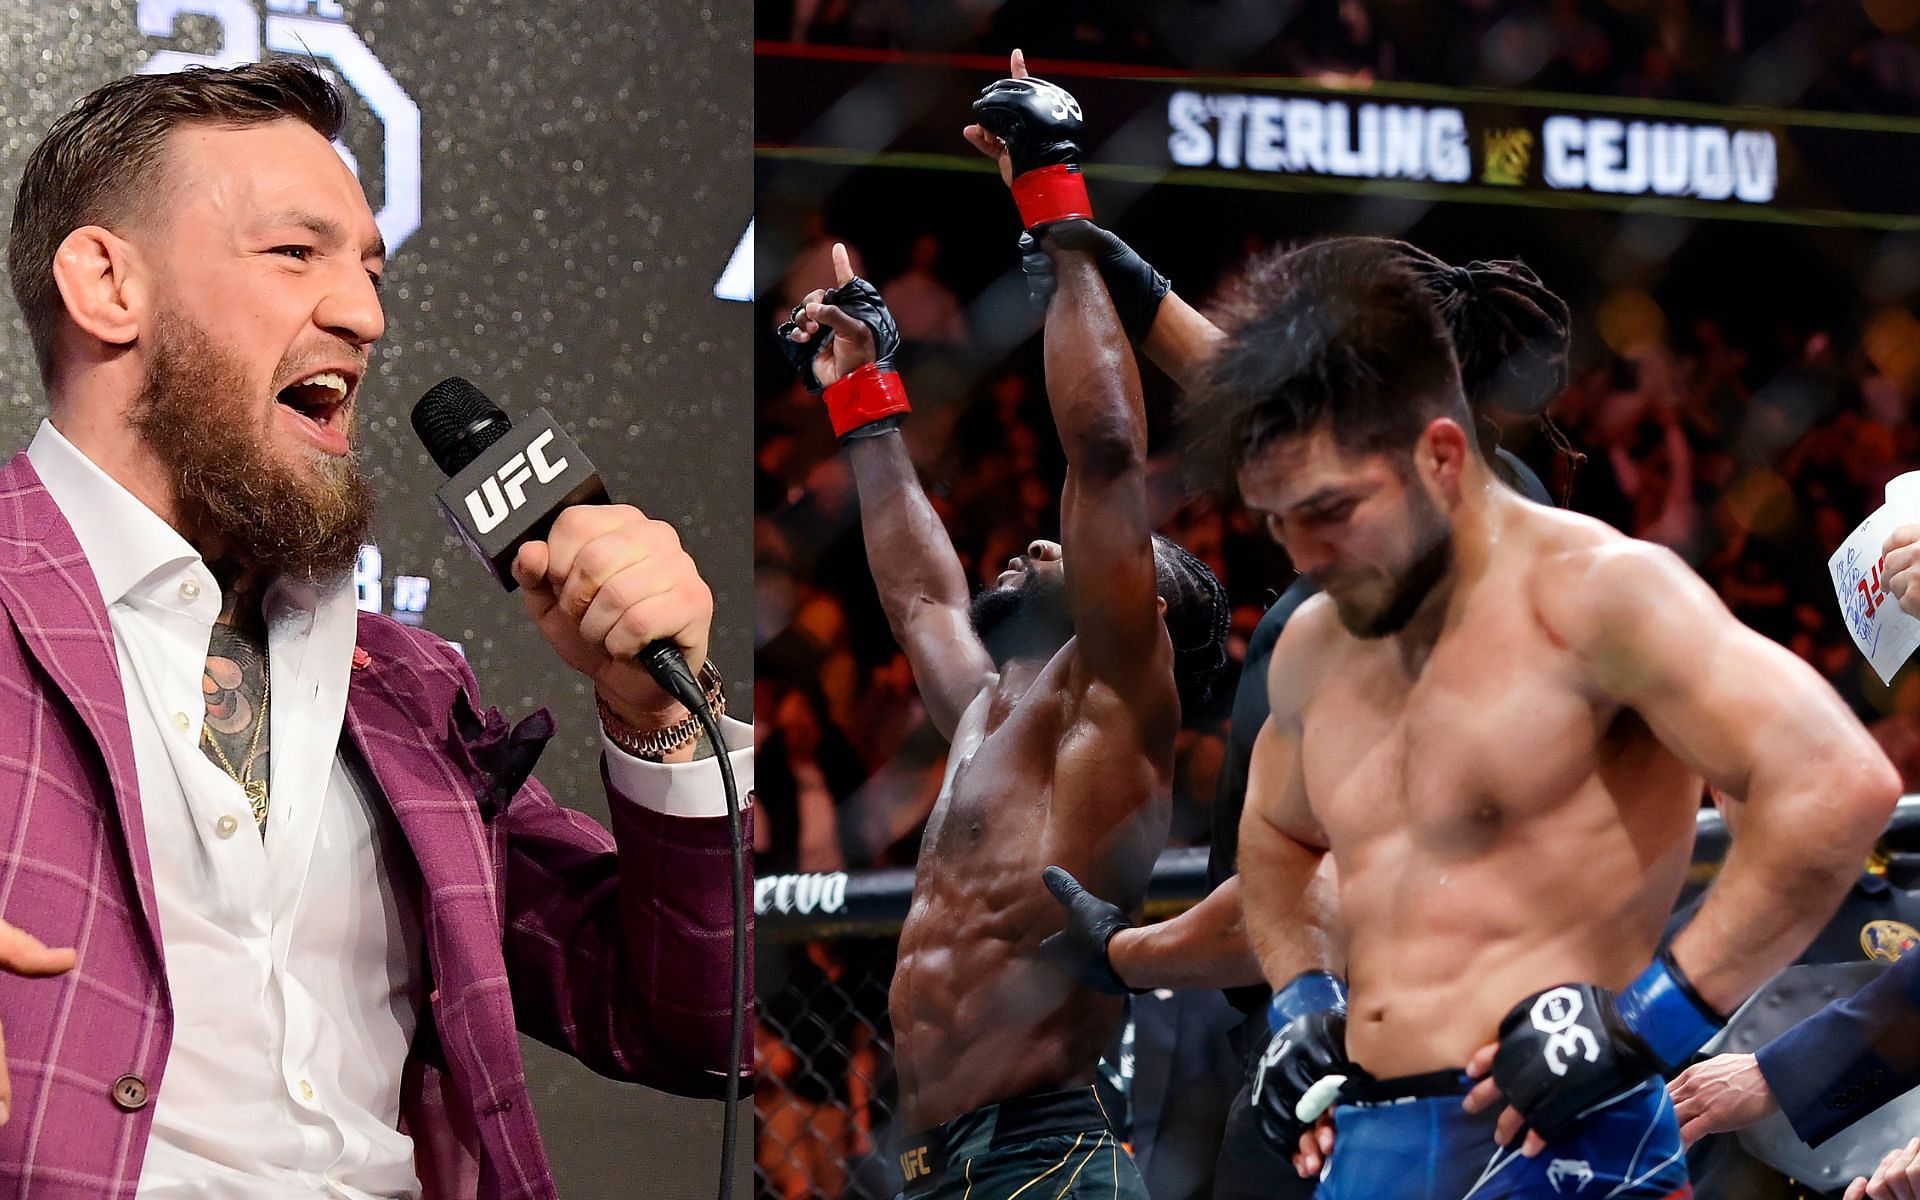 Conor McGregor (left) and Henry Cejudo (right). [via Getty Images]